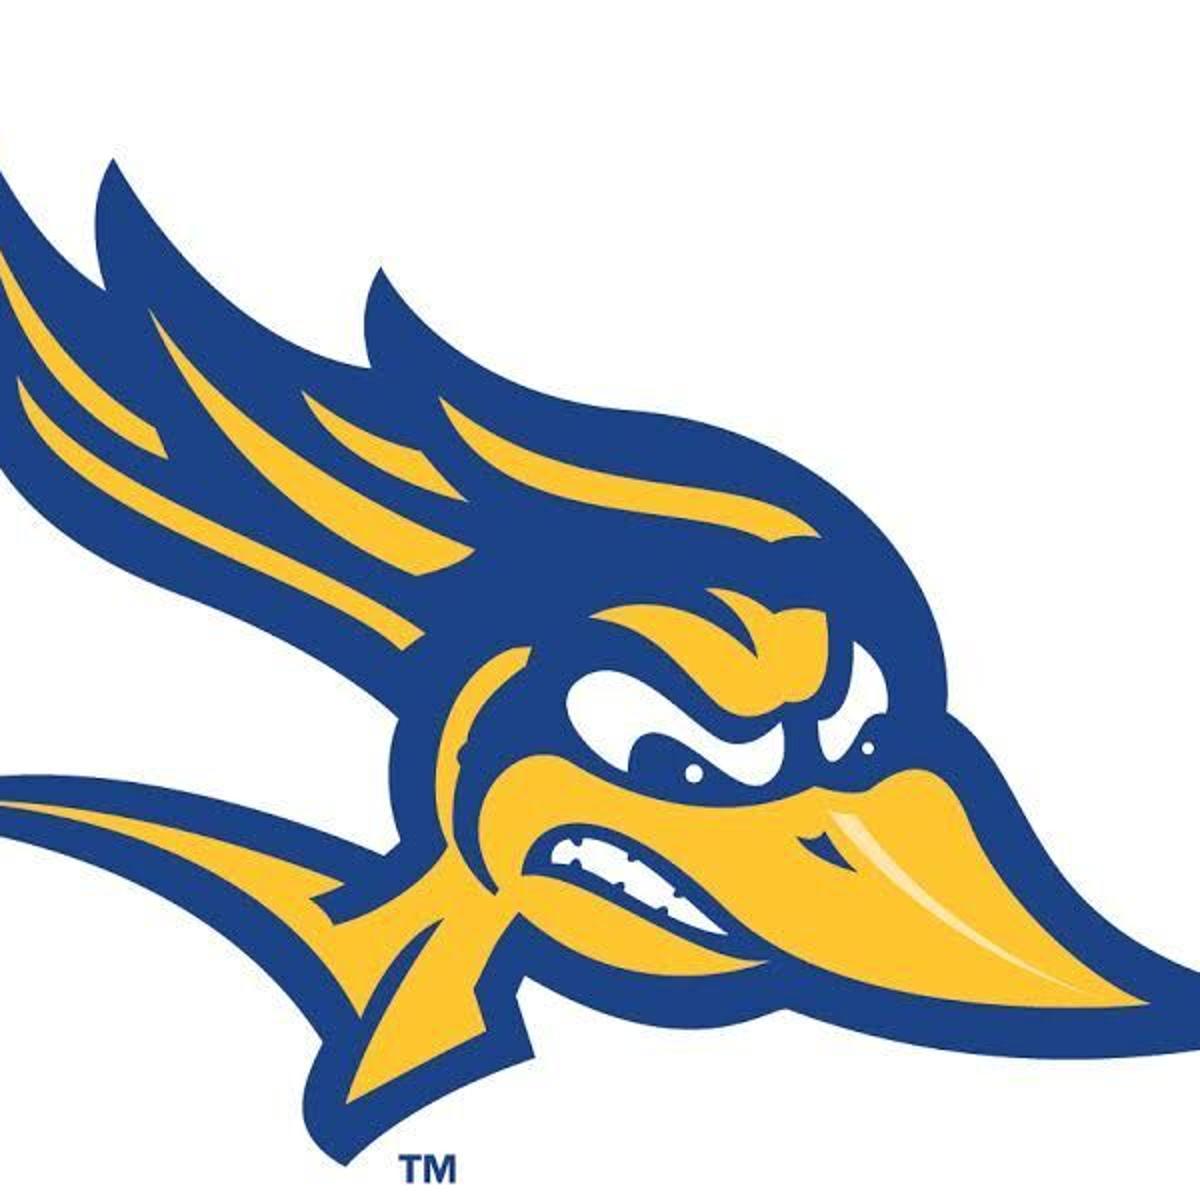 Csub 2022 Calendar Cancellations Continue As Csub Will Miss Women's Basketball, Wrestling  Matches | Sports | Bakersfield.com